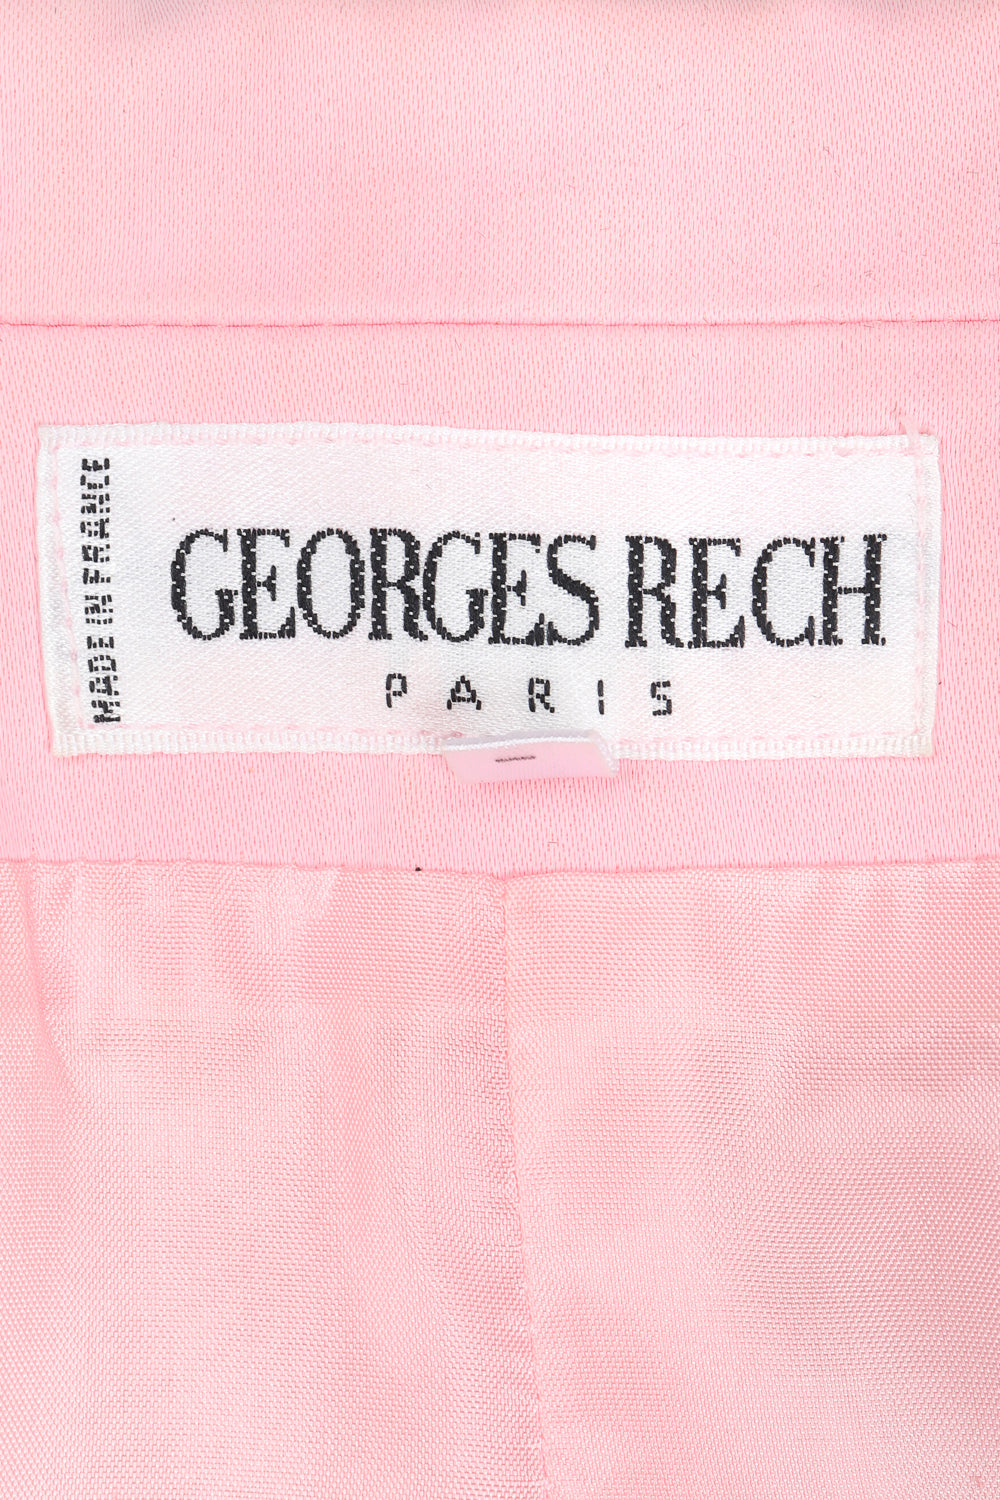 Recess Designer Consignment Vintage Georges Rech Millennial Pink Boxy Cropped Sateen Jacket Los Angeles Resale